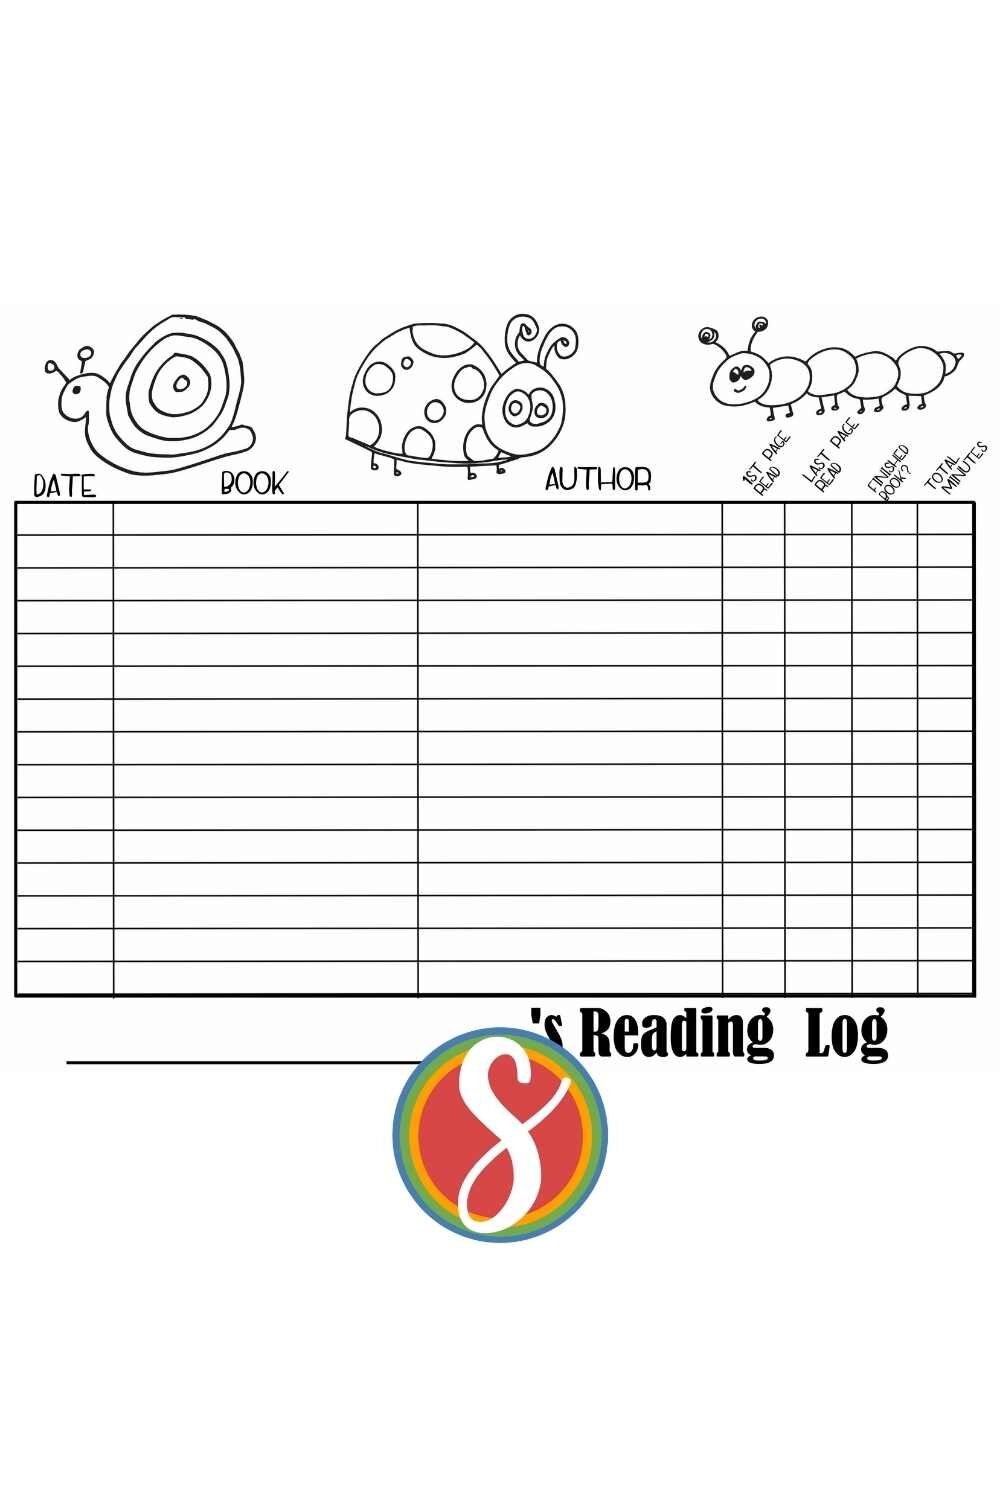 Free printable reading log to track your reading for your reading program - with a snail, ladybug, and a caterpillar from Stevie Doodles